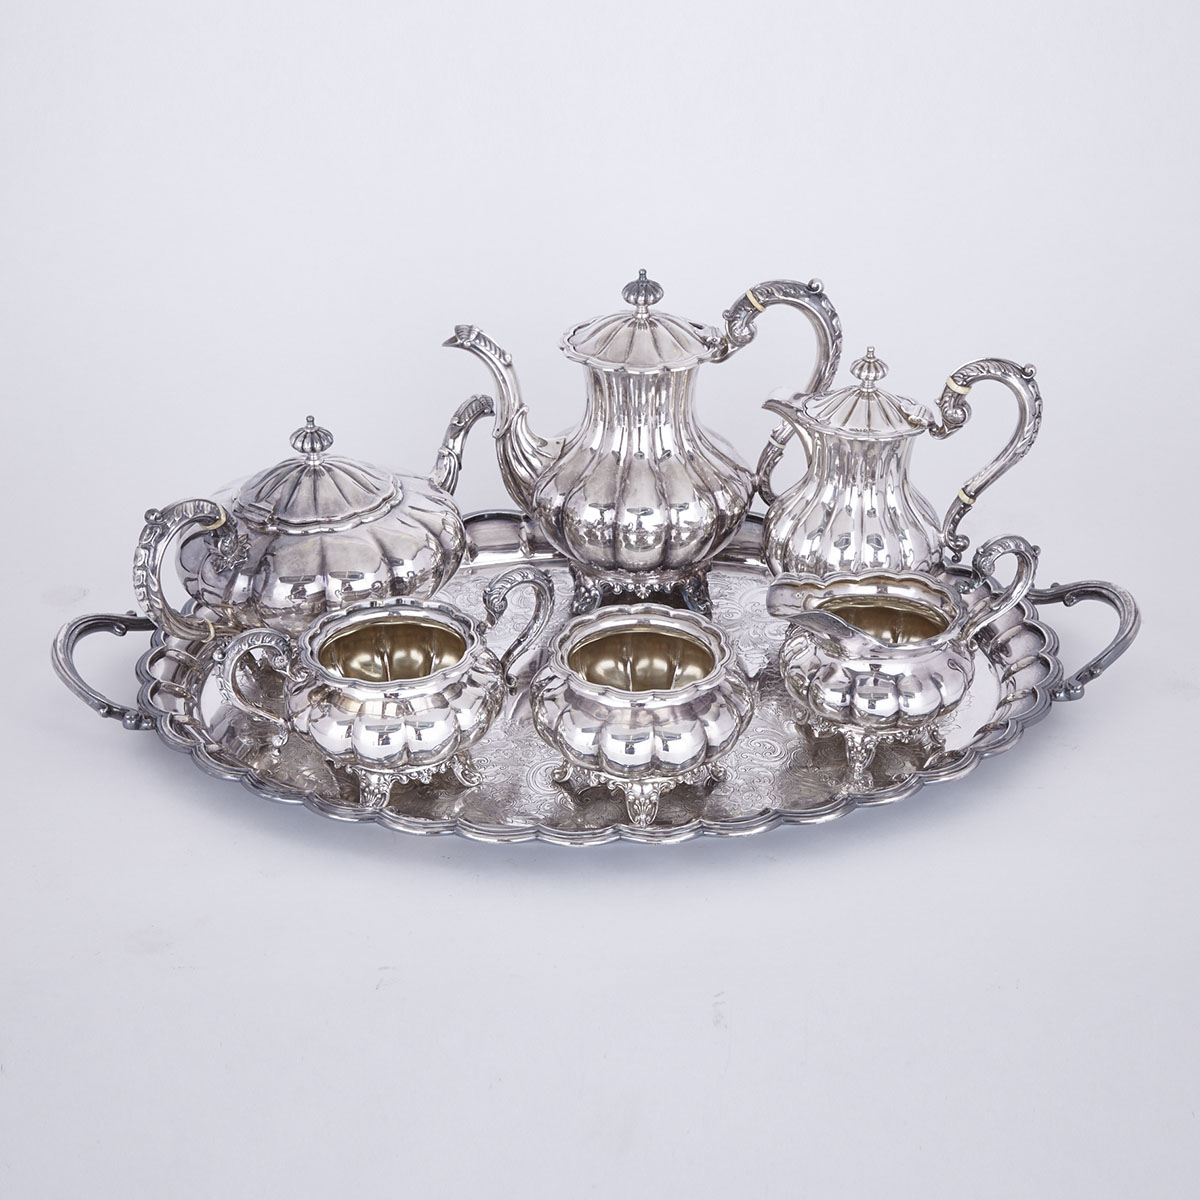 Canadian ‘Regency’ Silver Plated Tea and Coffee Service, Henry Birks & Sons, 20th century